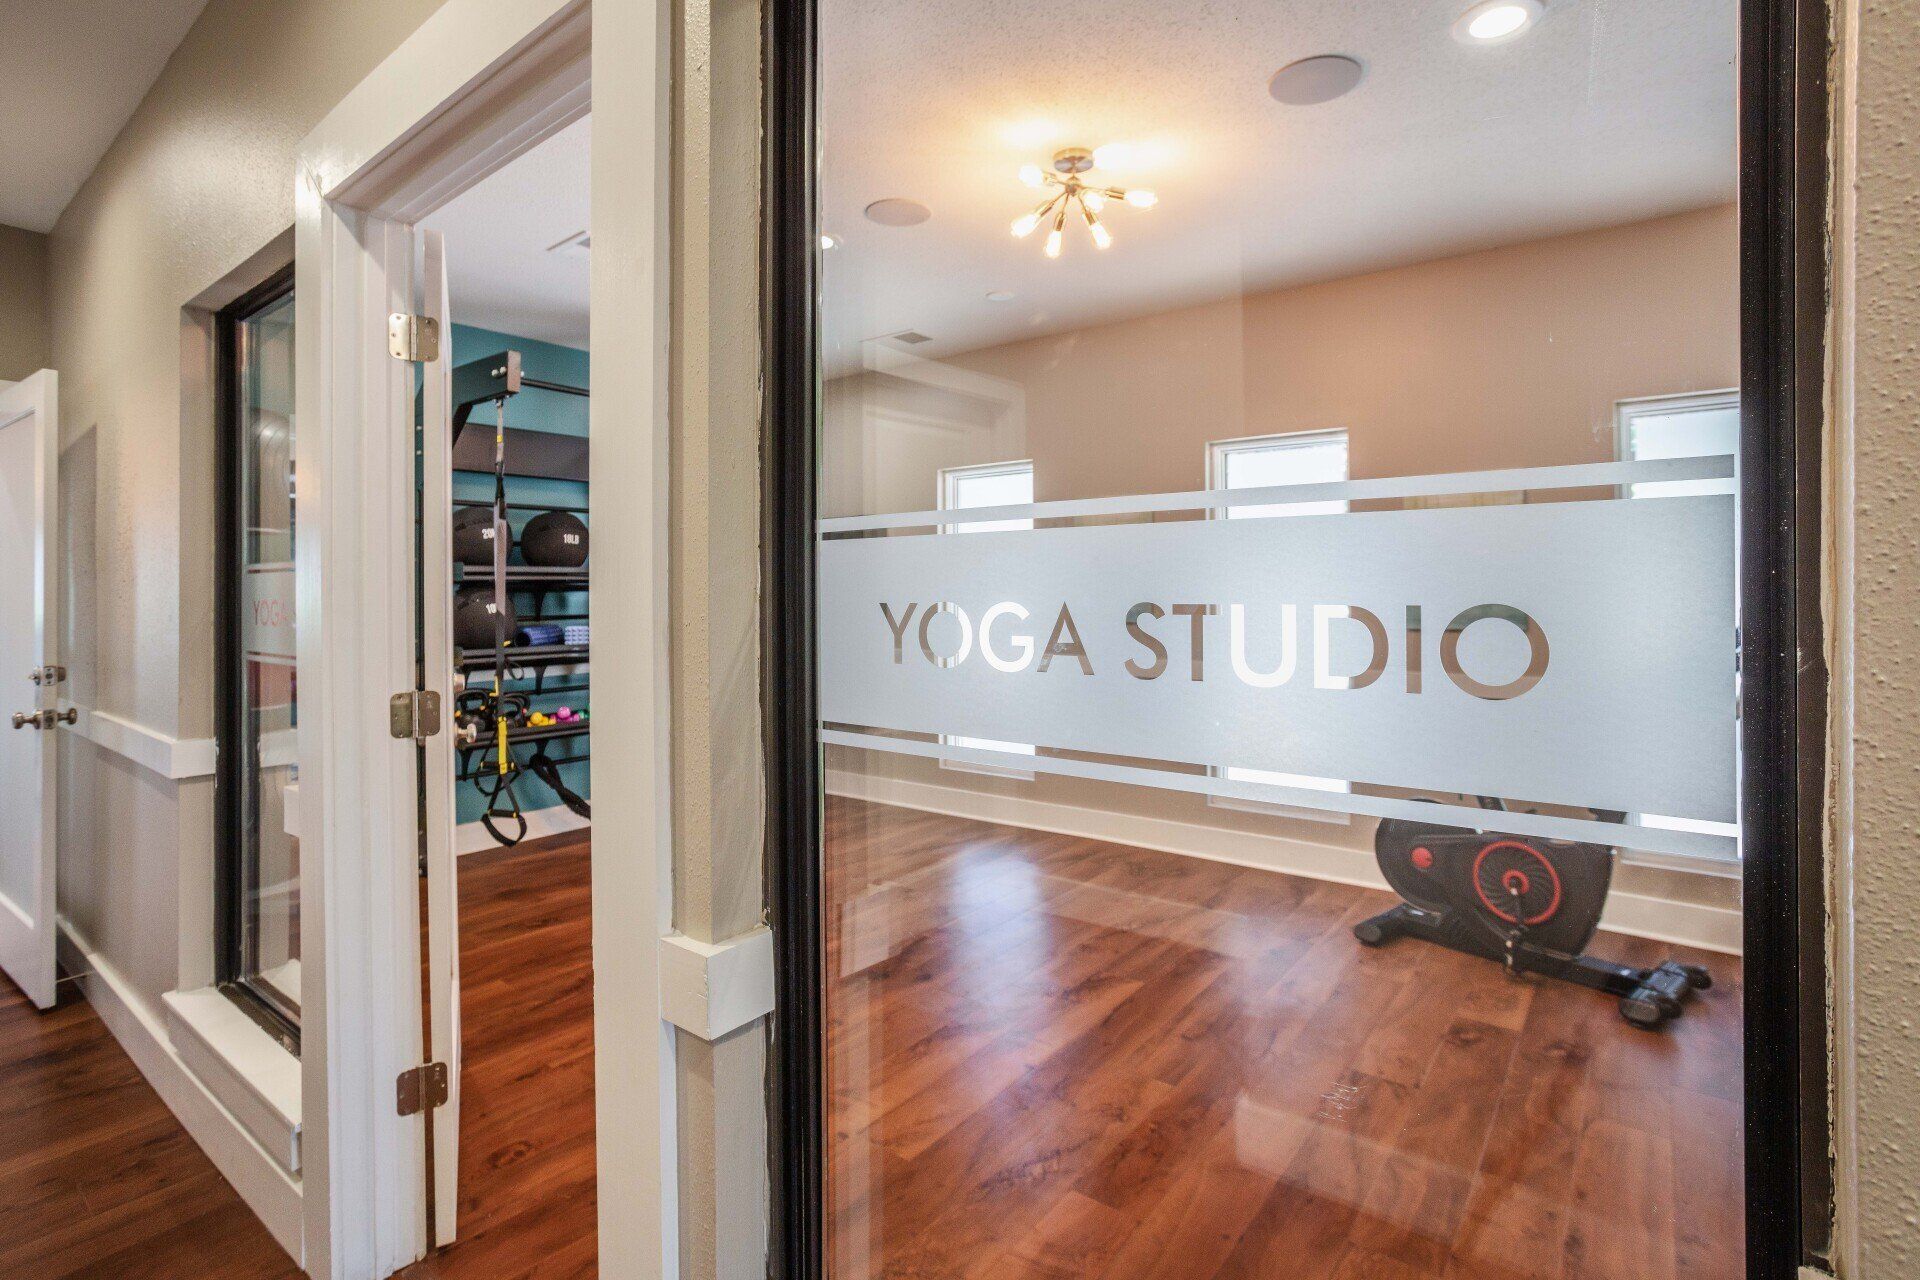 Yoga studio at Timber Hollow in Fairfield, OH.